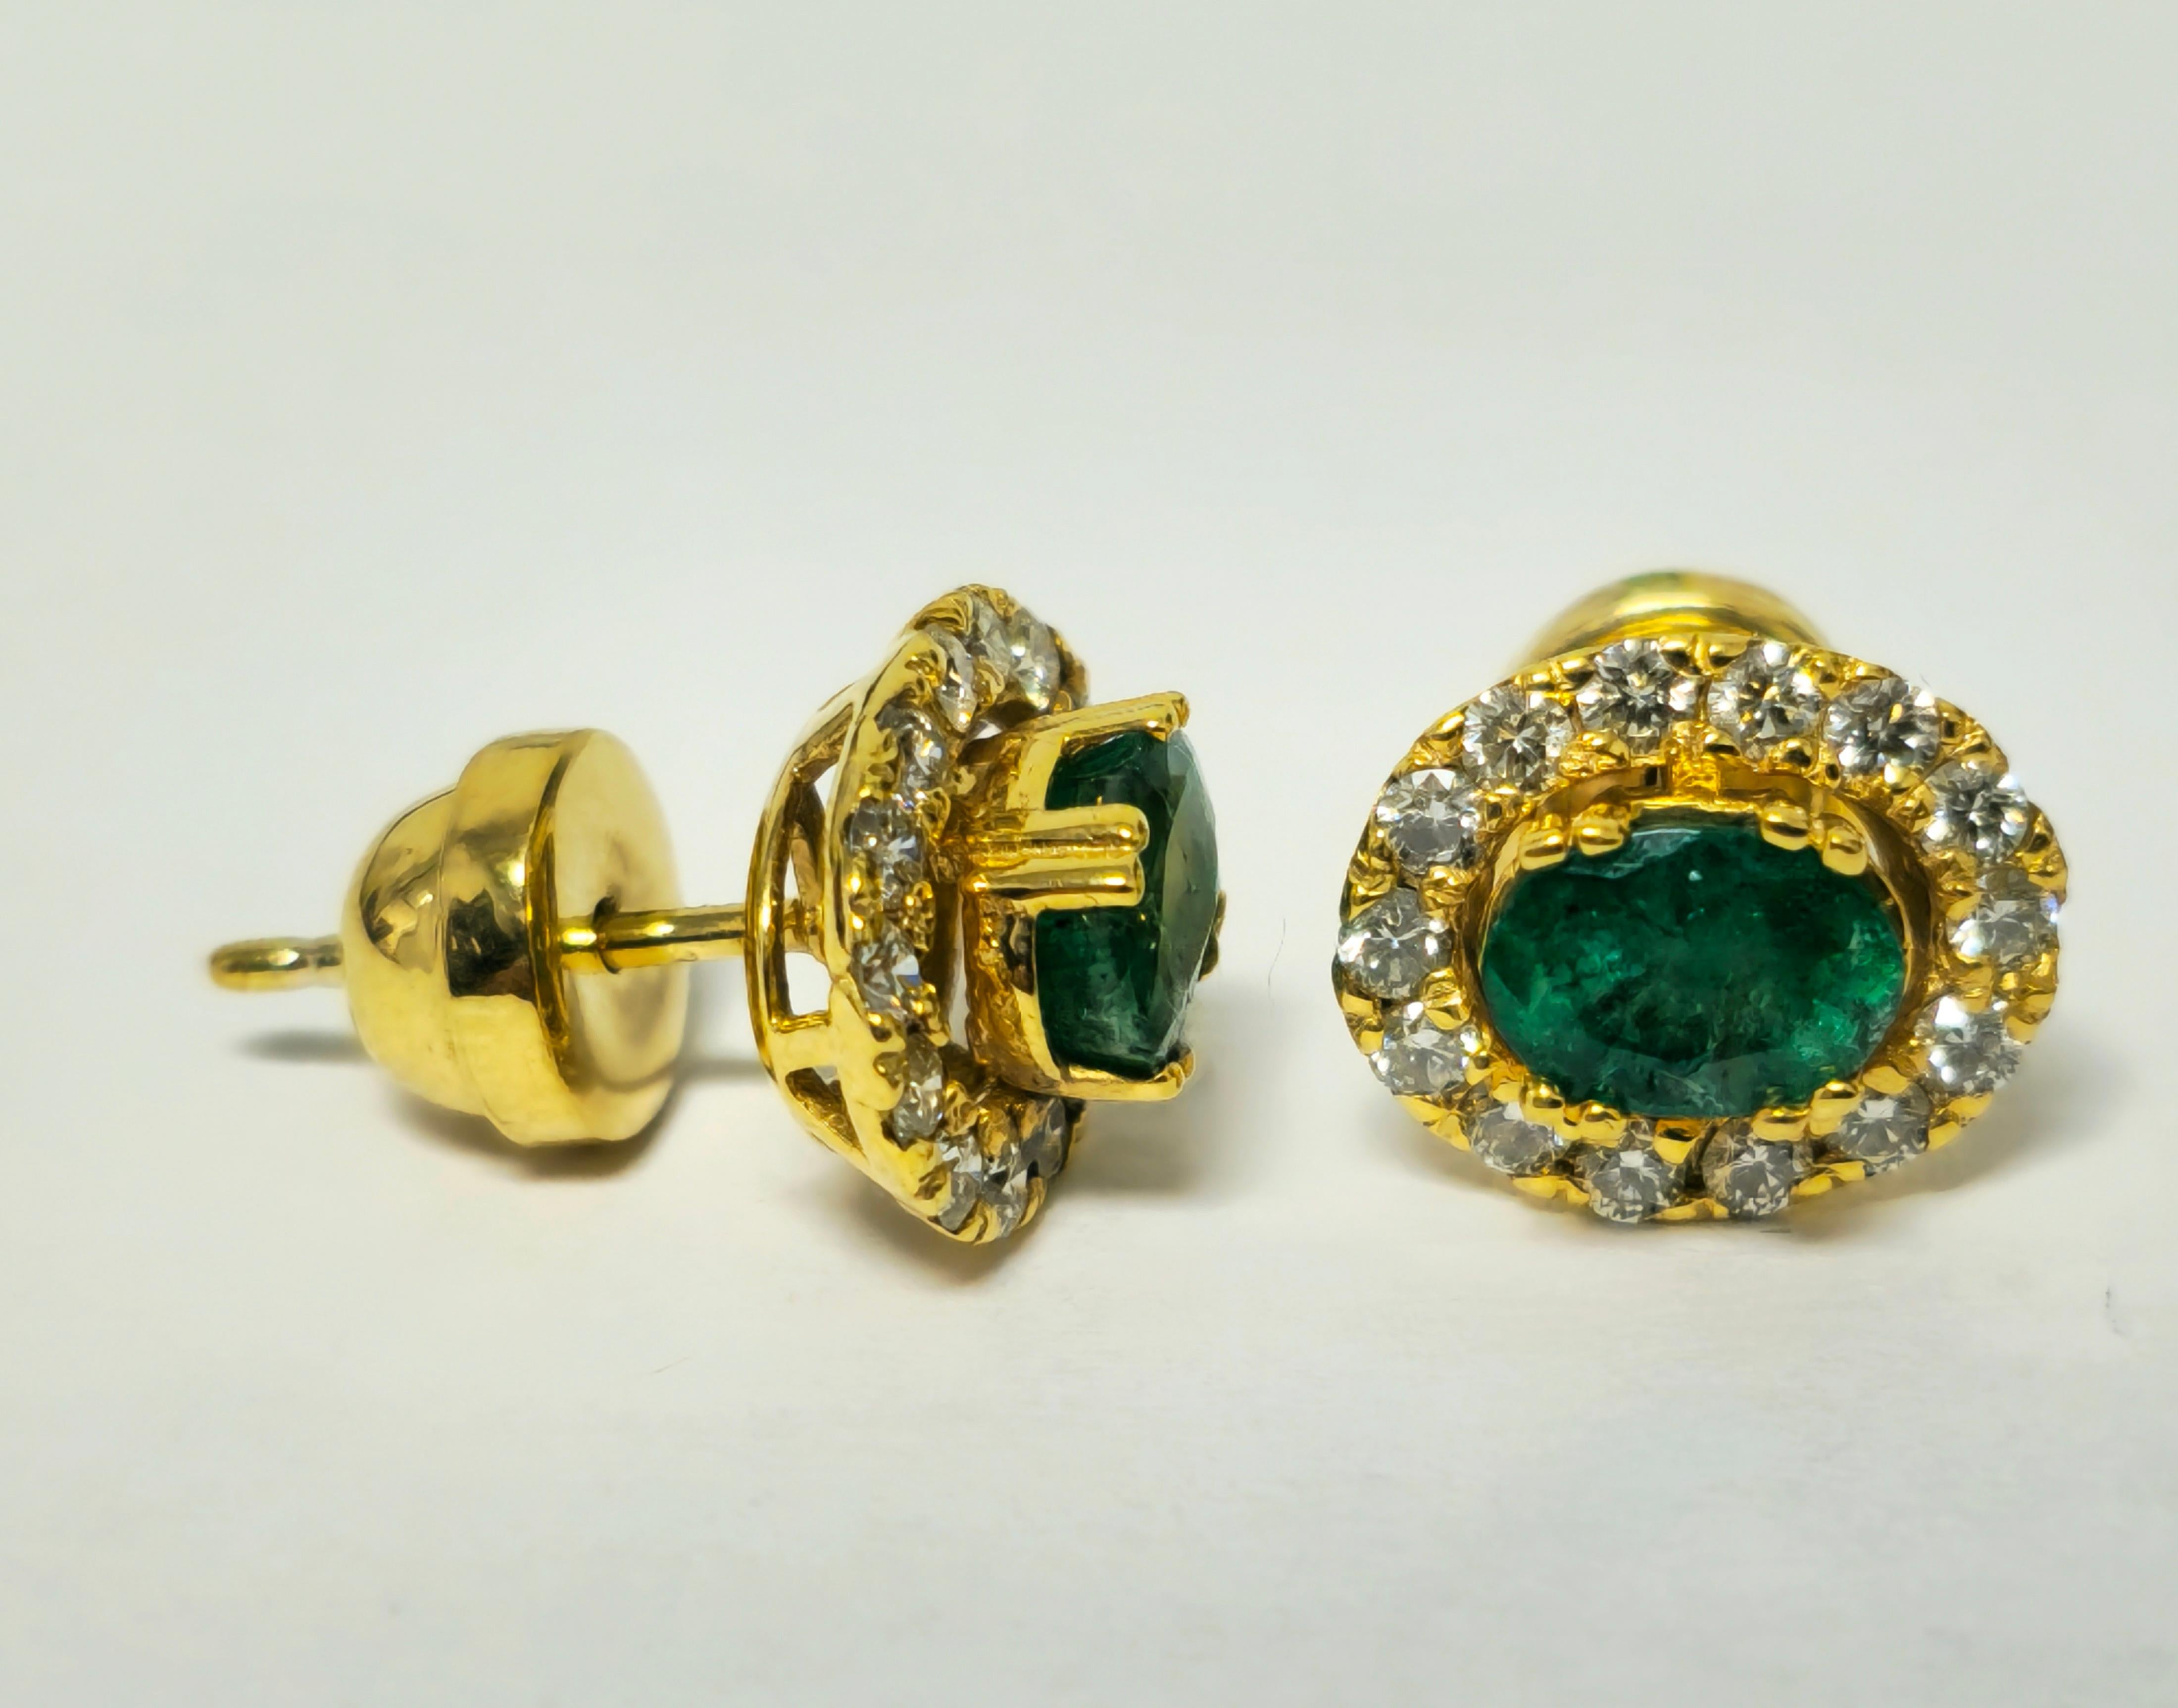 Fashioned from 14k yellow gold, these modern emerald diamond stud earrings boast a total of 2.50 carats of oval-cut emeralds, showcasing excellent color and saturation. Accompanied by 1.50 carats of round brilliant-cut diamonds with VS2 clarity and